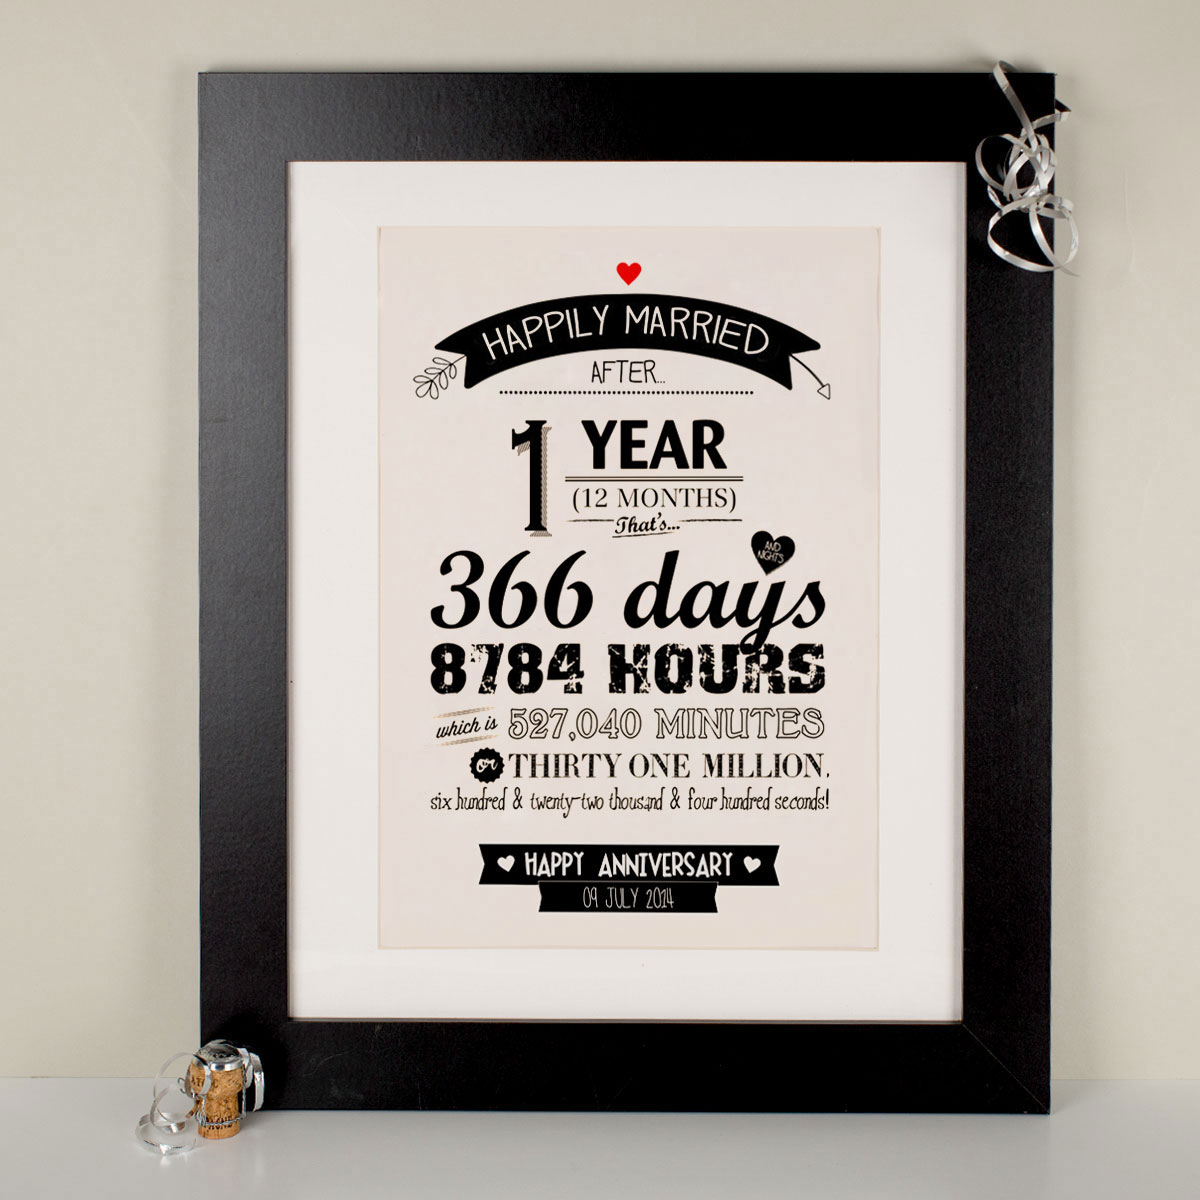 Personalised Framed Print - After 1 Year